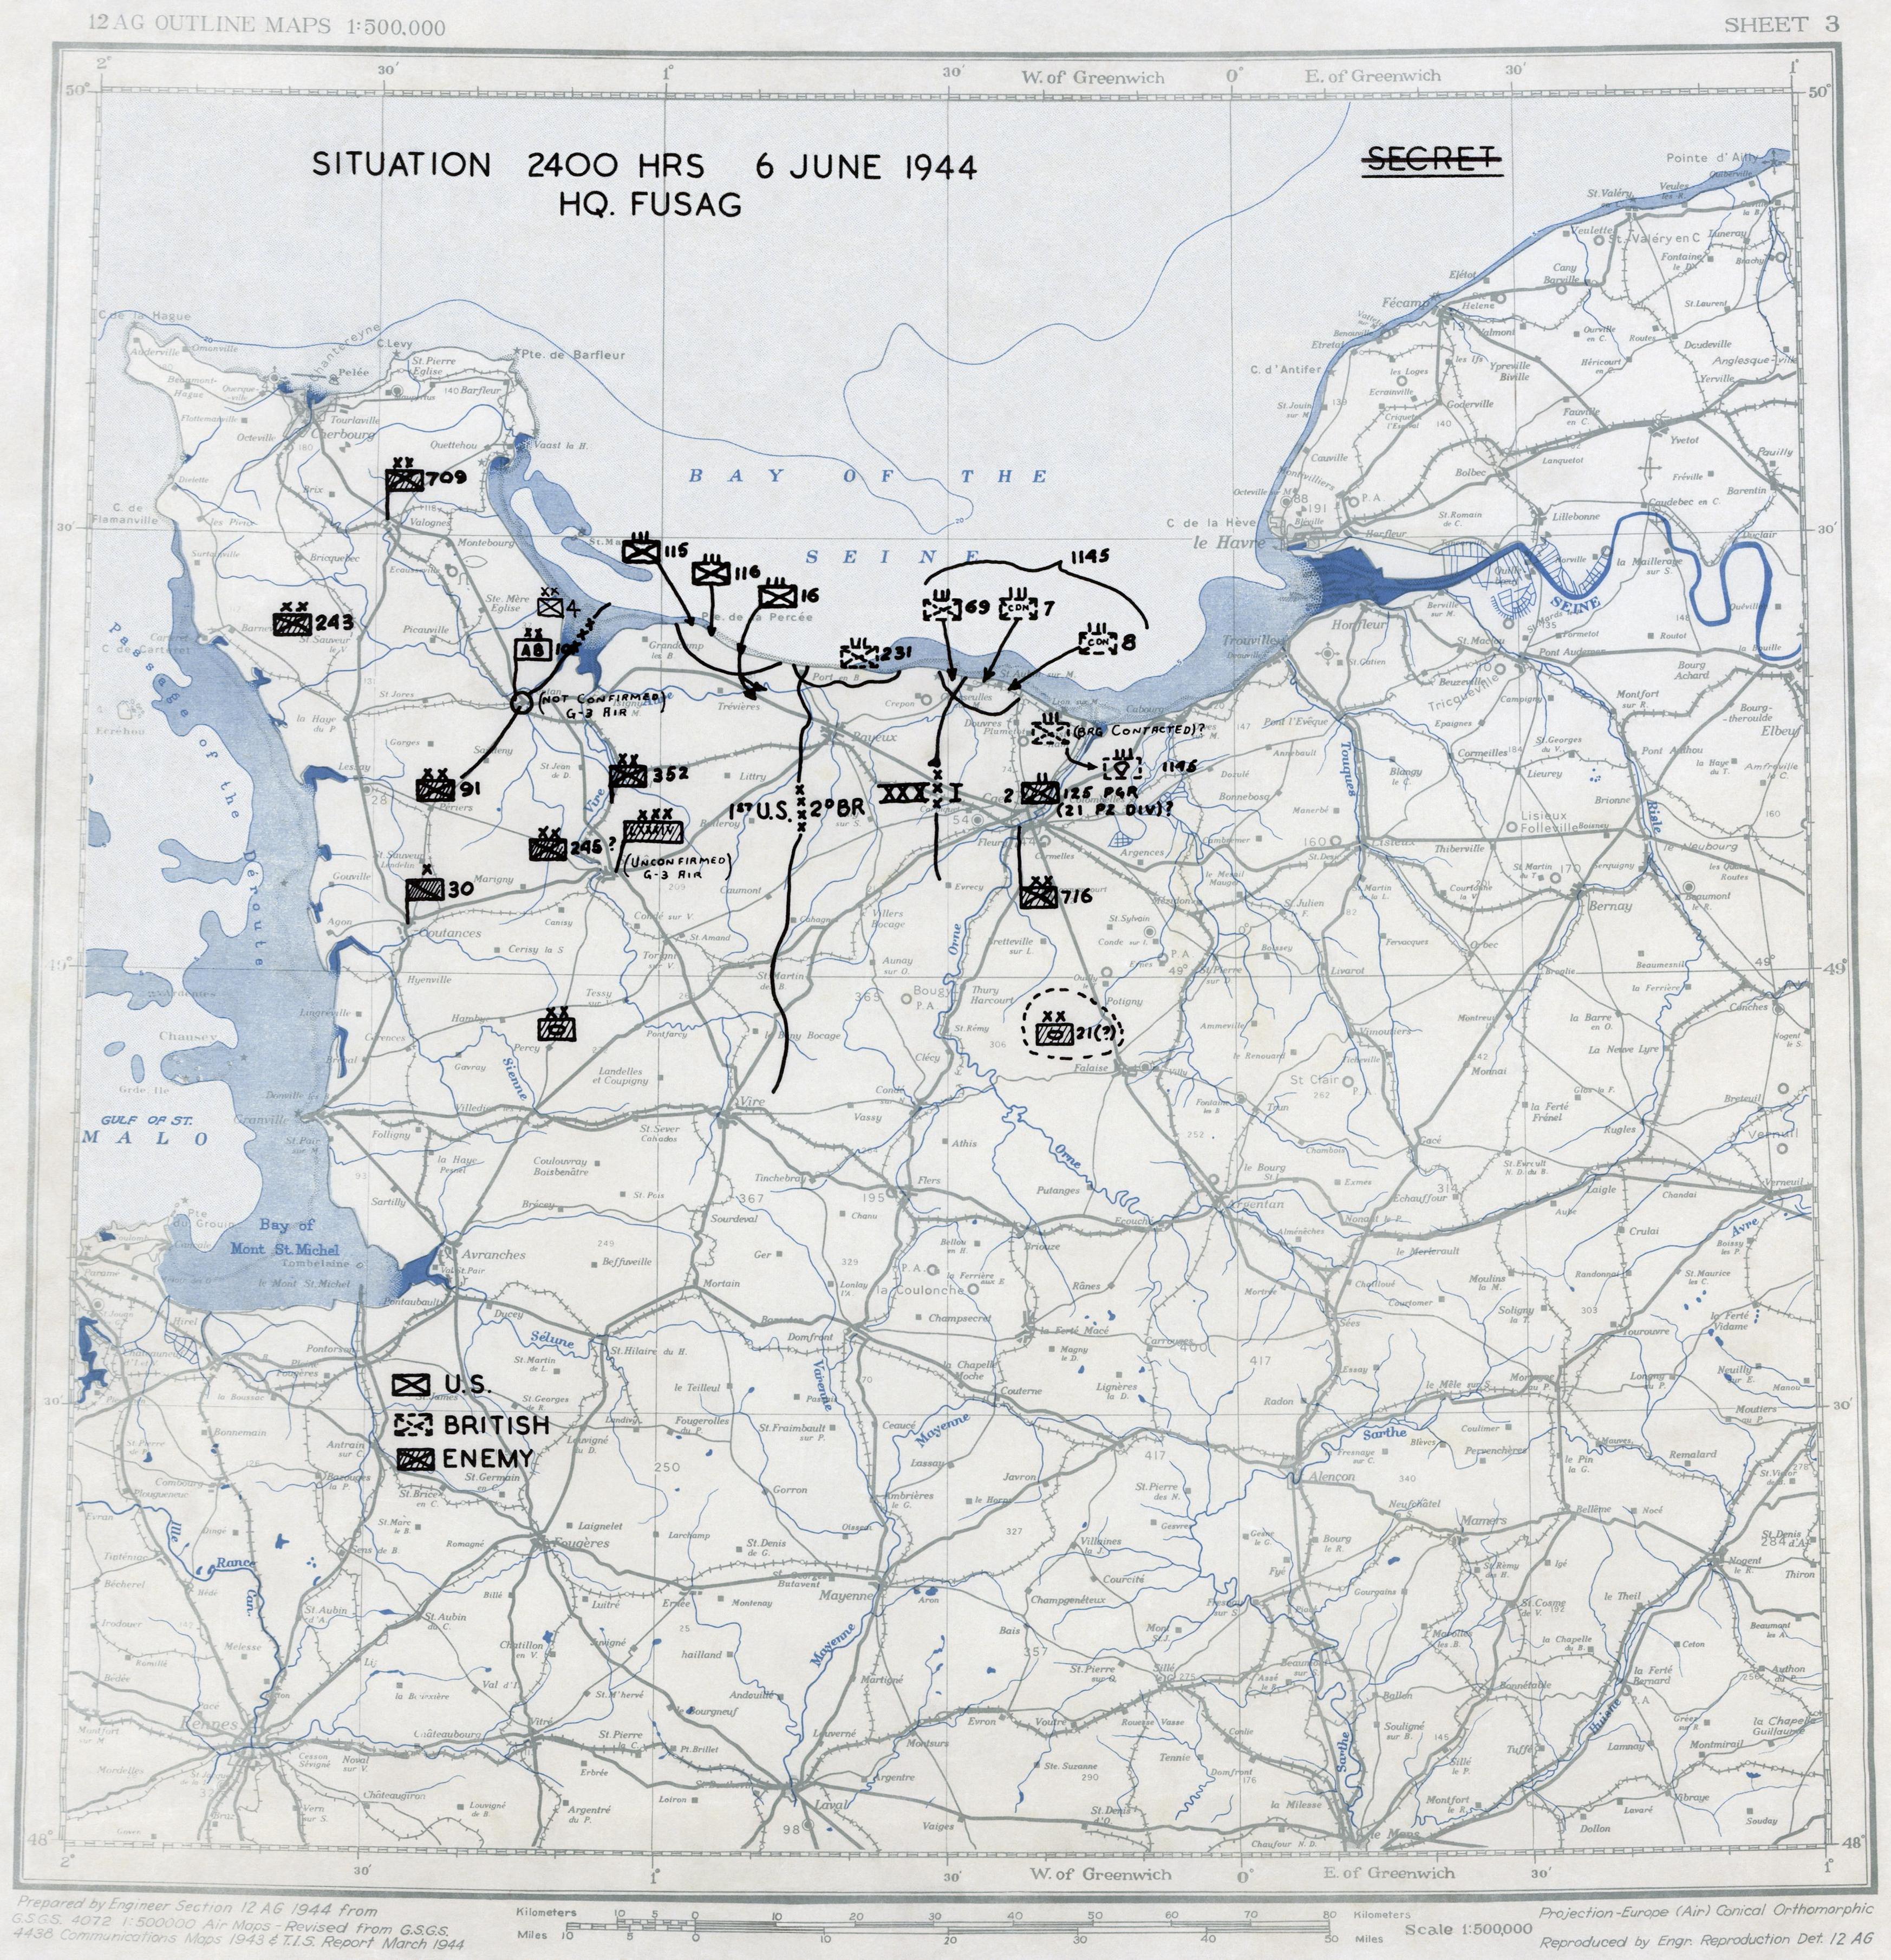 Map noting situation at Normandy, France at 2400 hours on 6 Jun 1944; note title text with deceptive American unit FUSAG